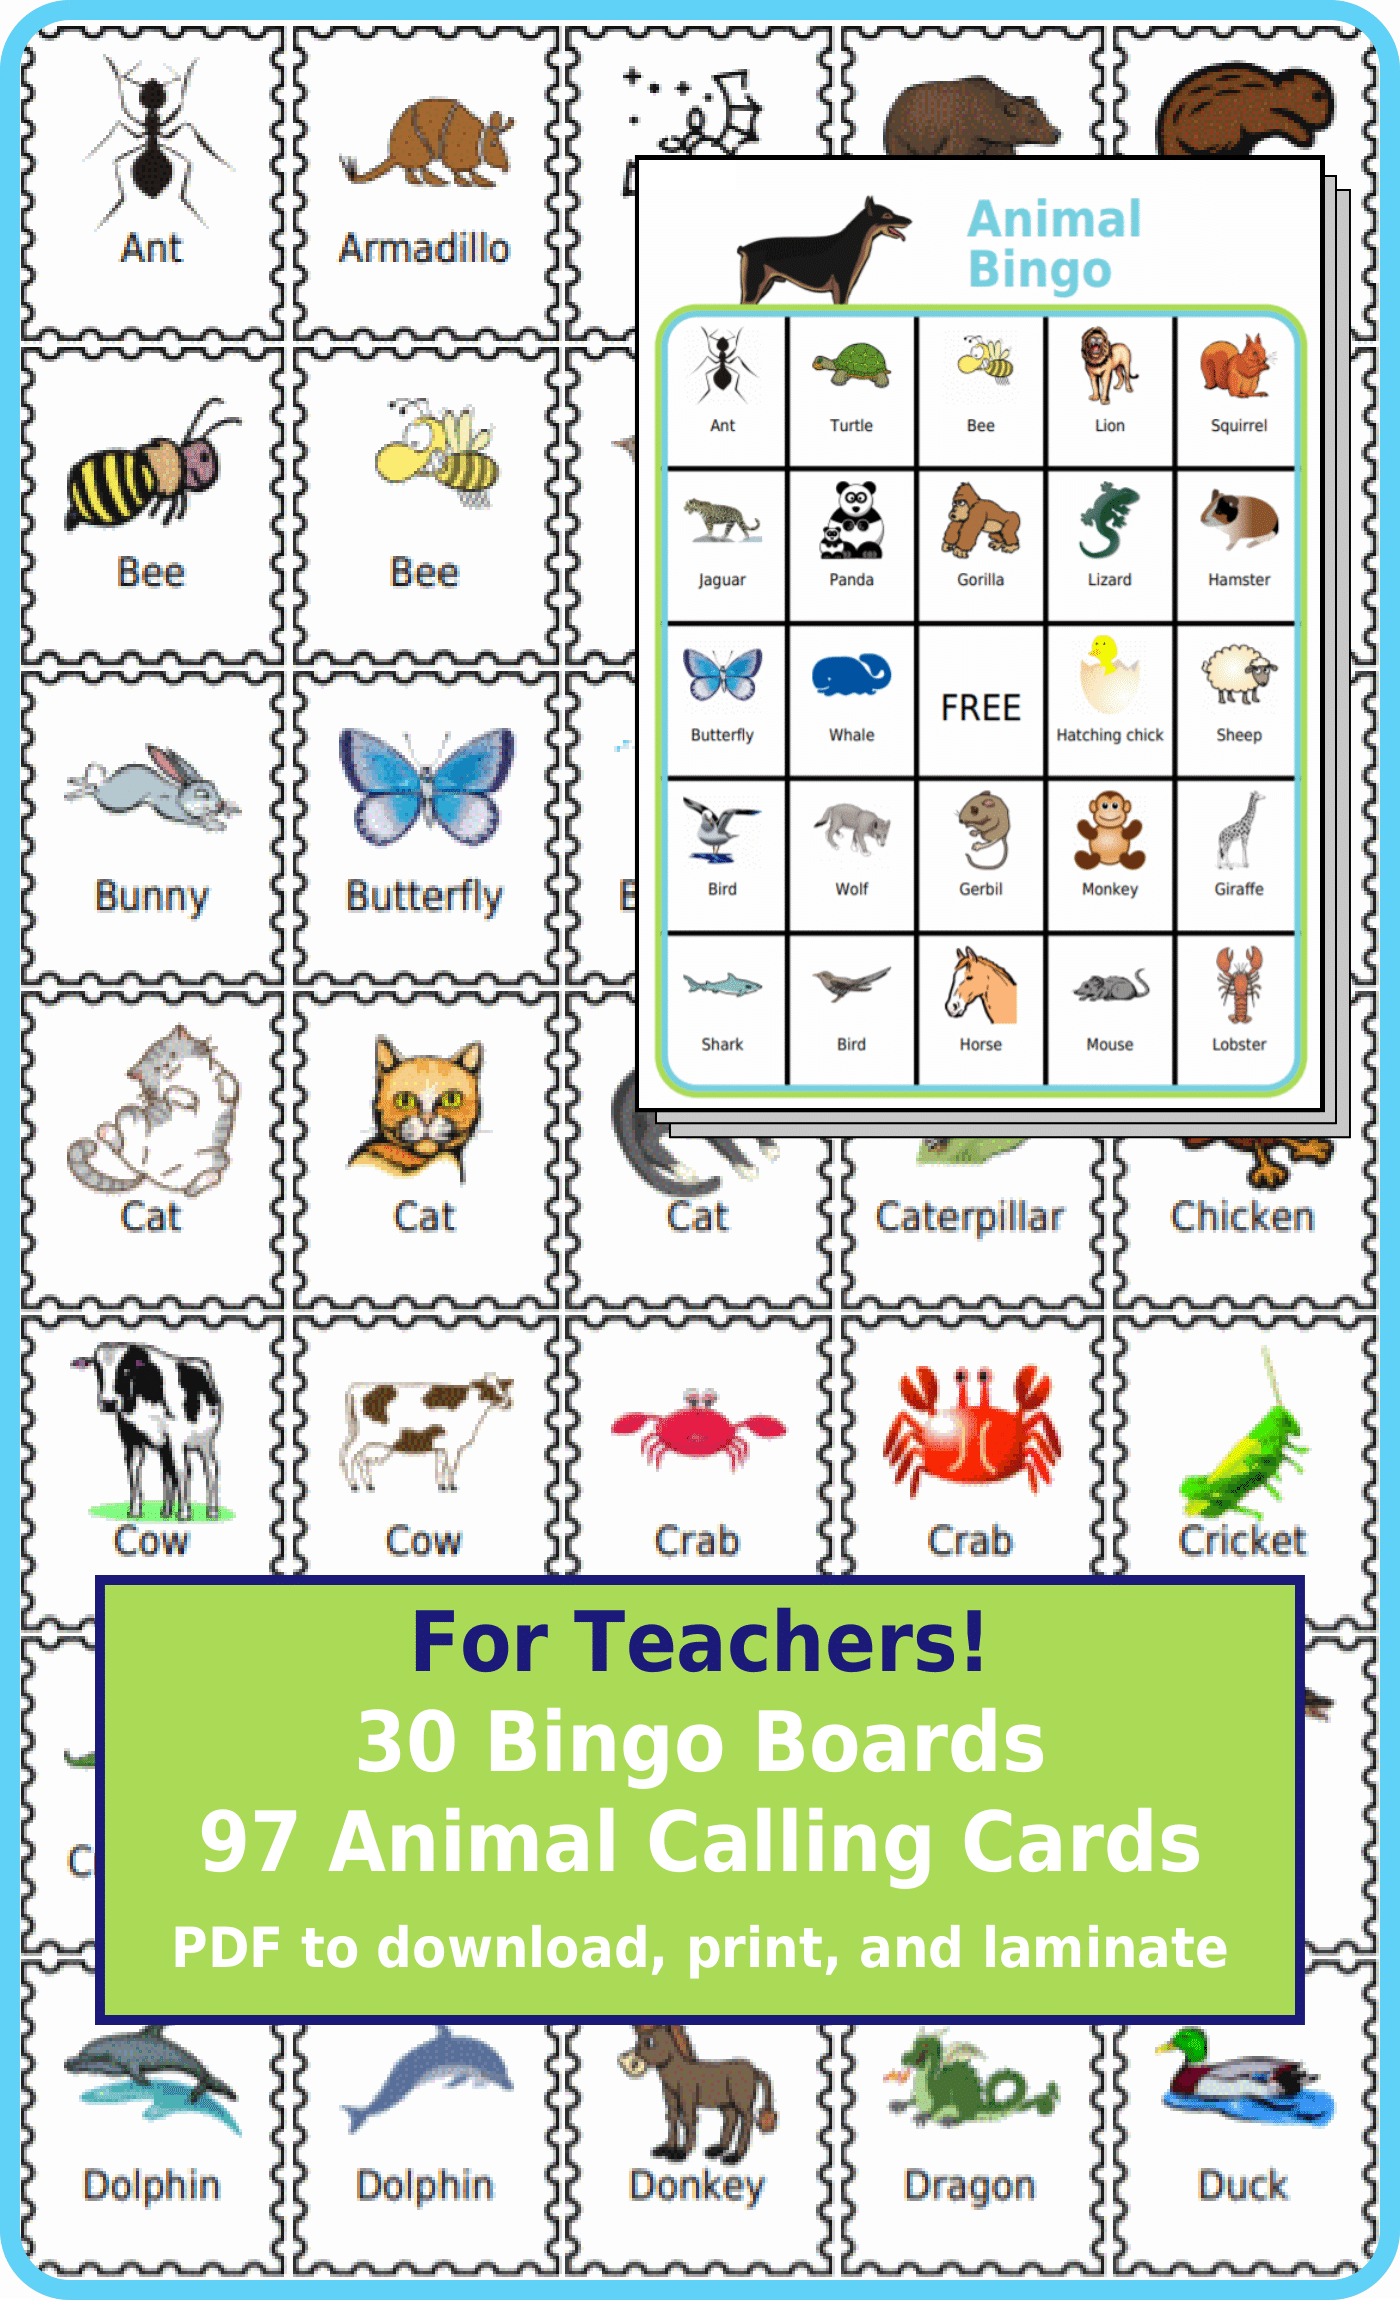 30 animal bingo boards and 97 calling cards